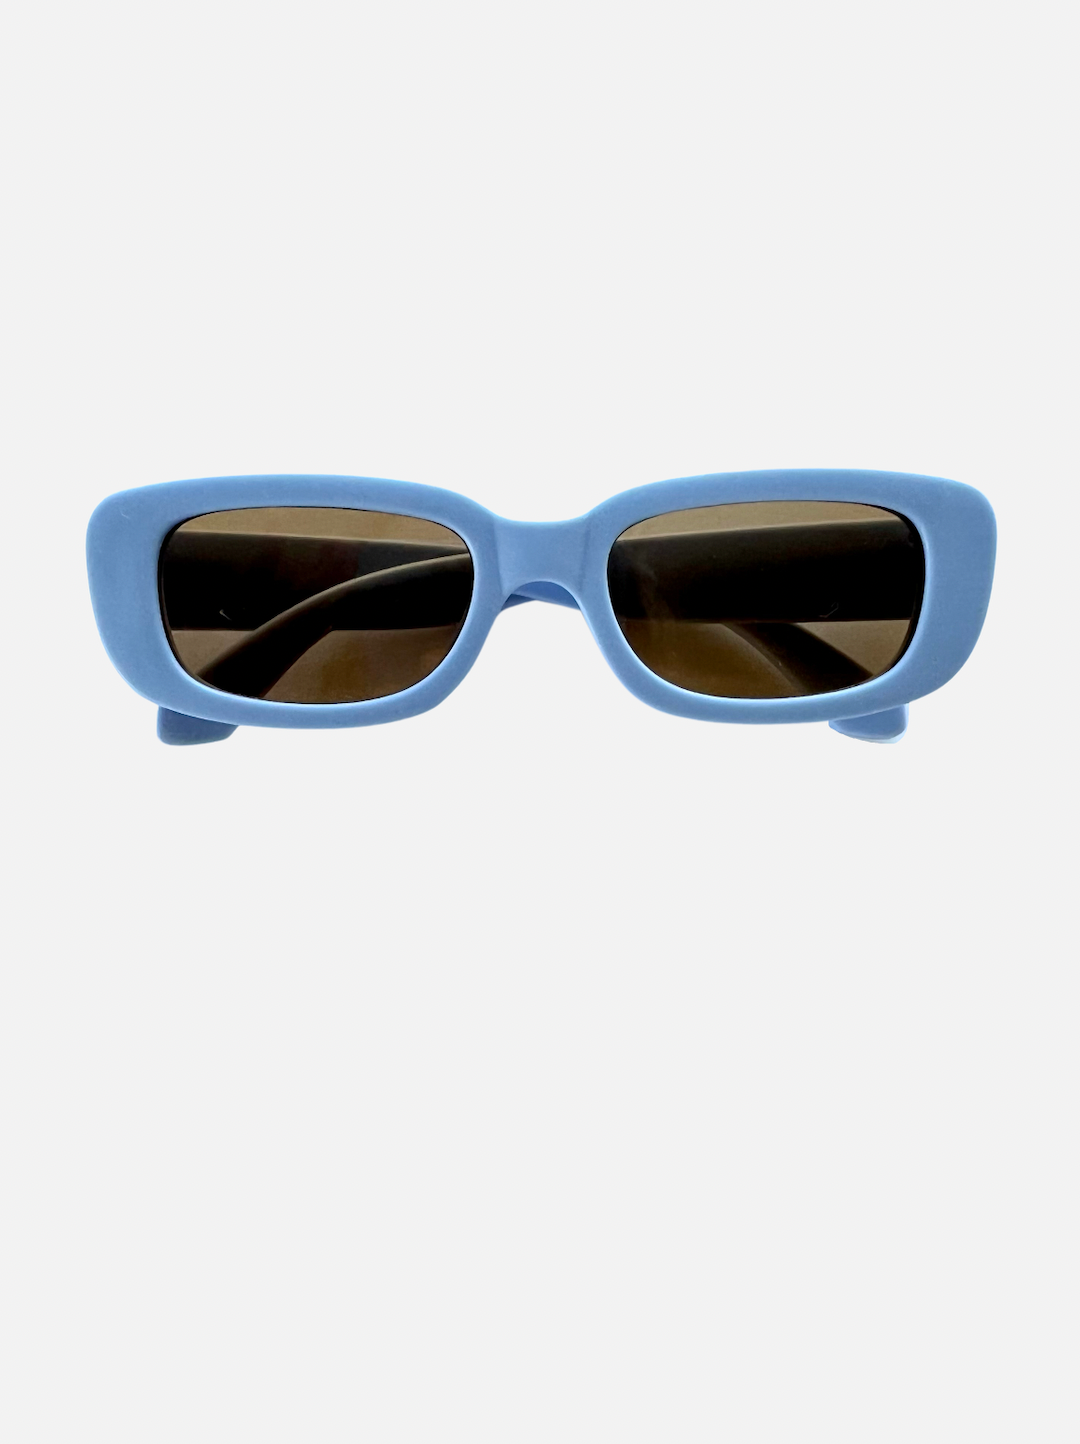 A pair of kids' sunglasses with brown lenses inside pale blue frames